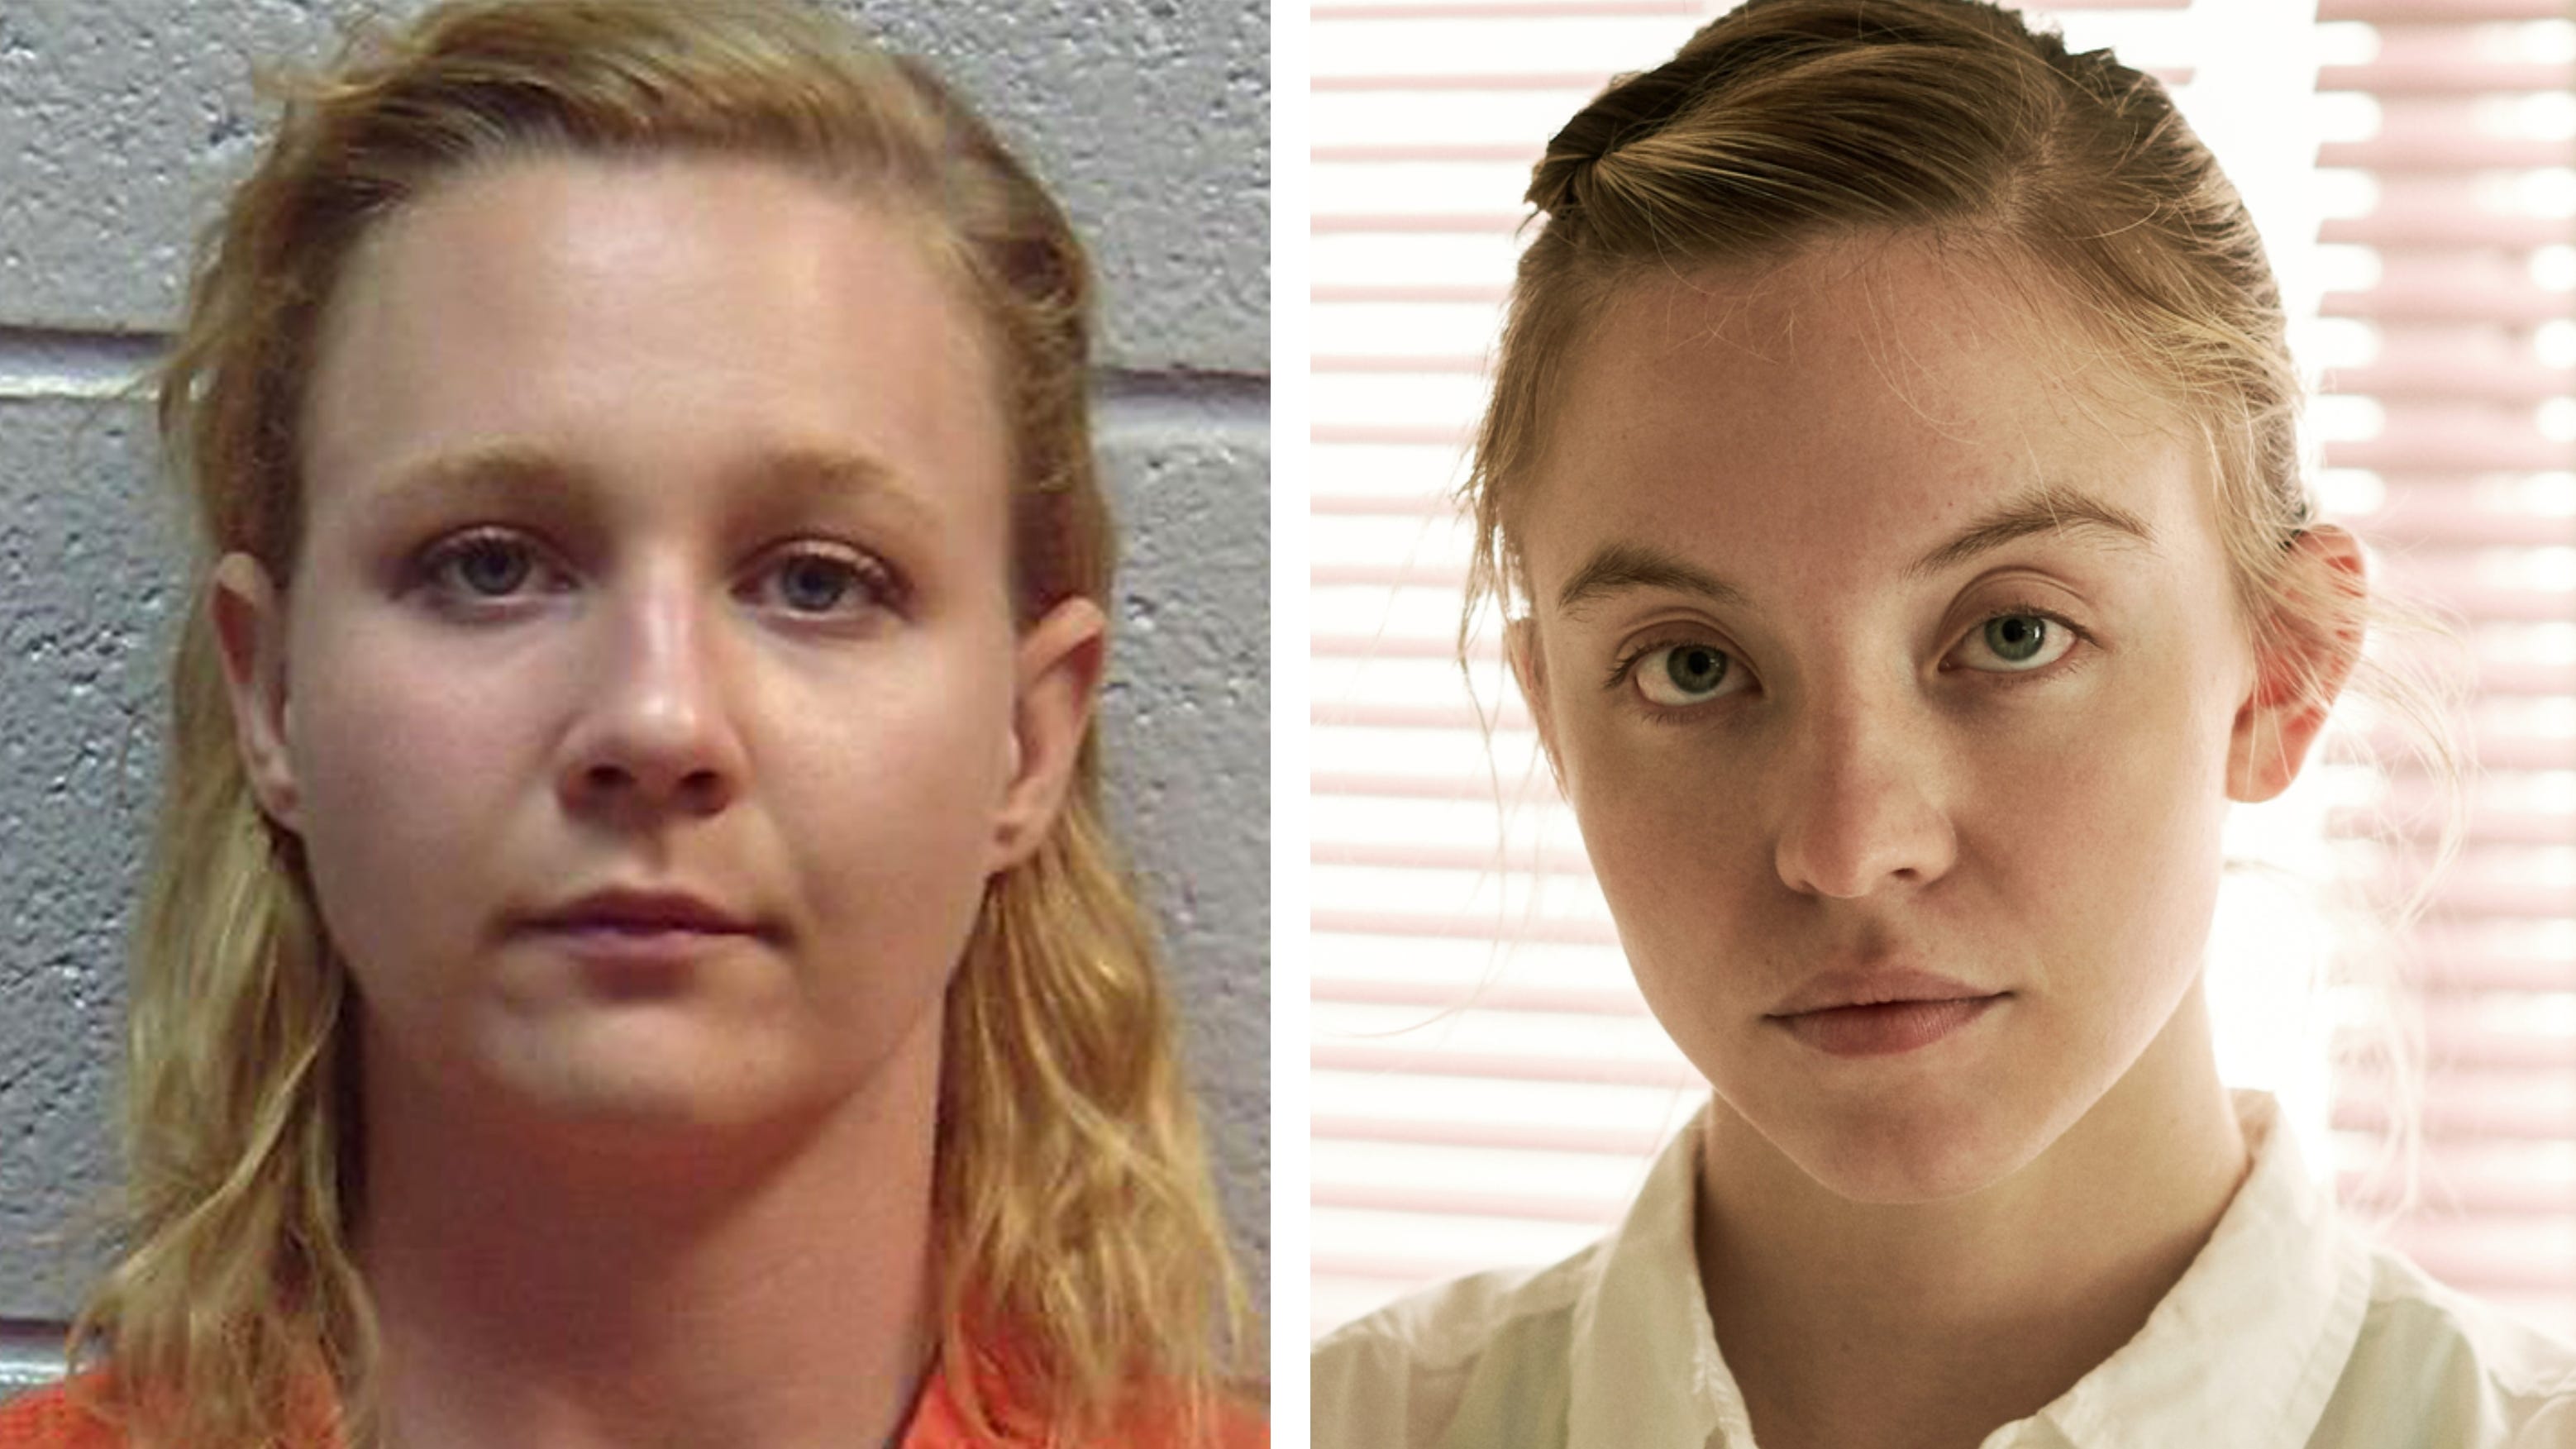 The real Reality Winner, left, and Sydney Sweeney, who plays her in HBO's "Reality."